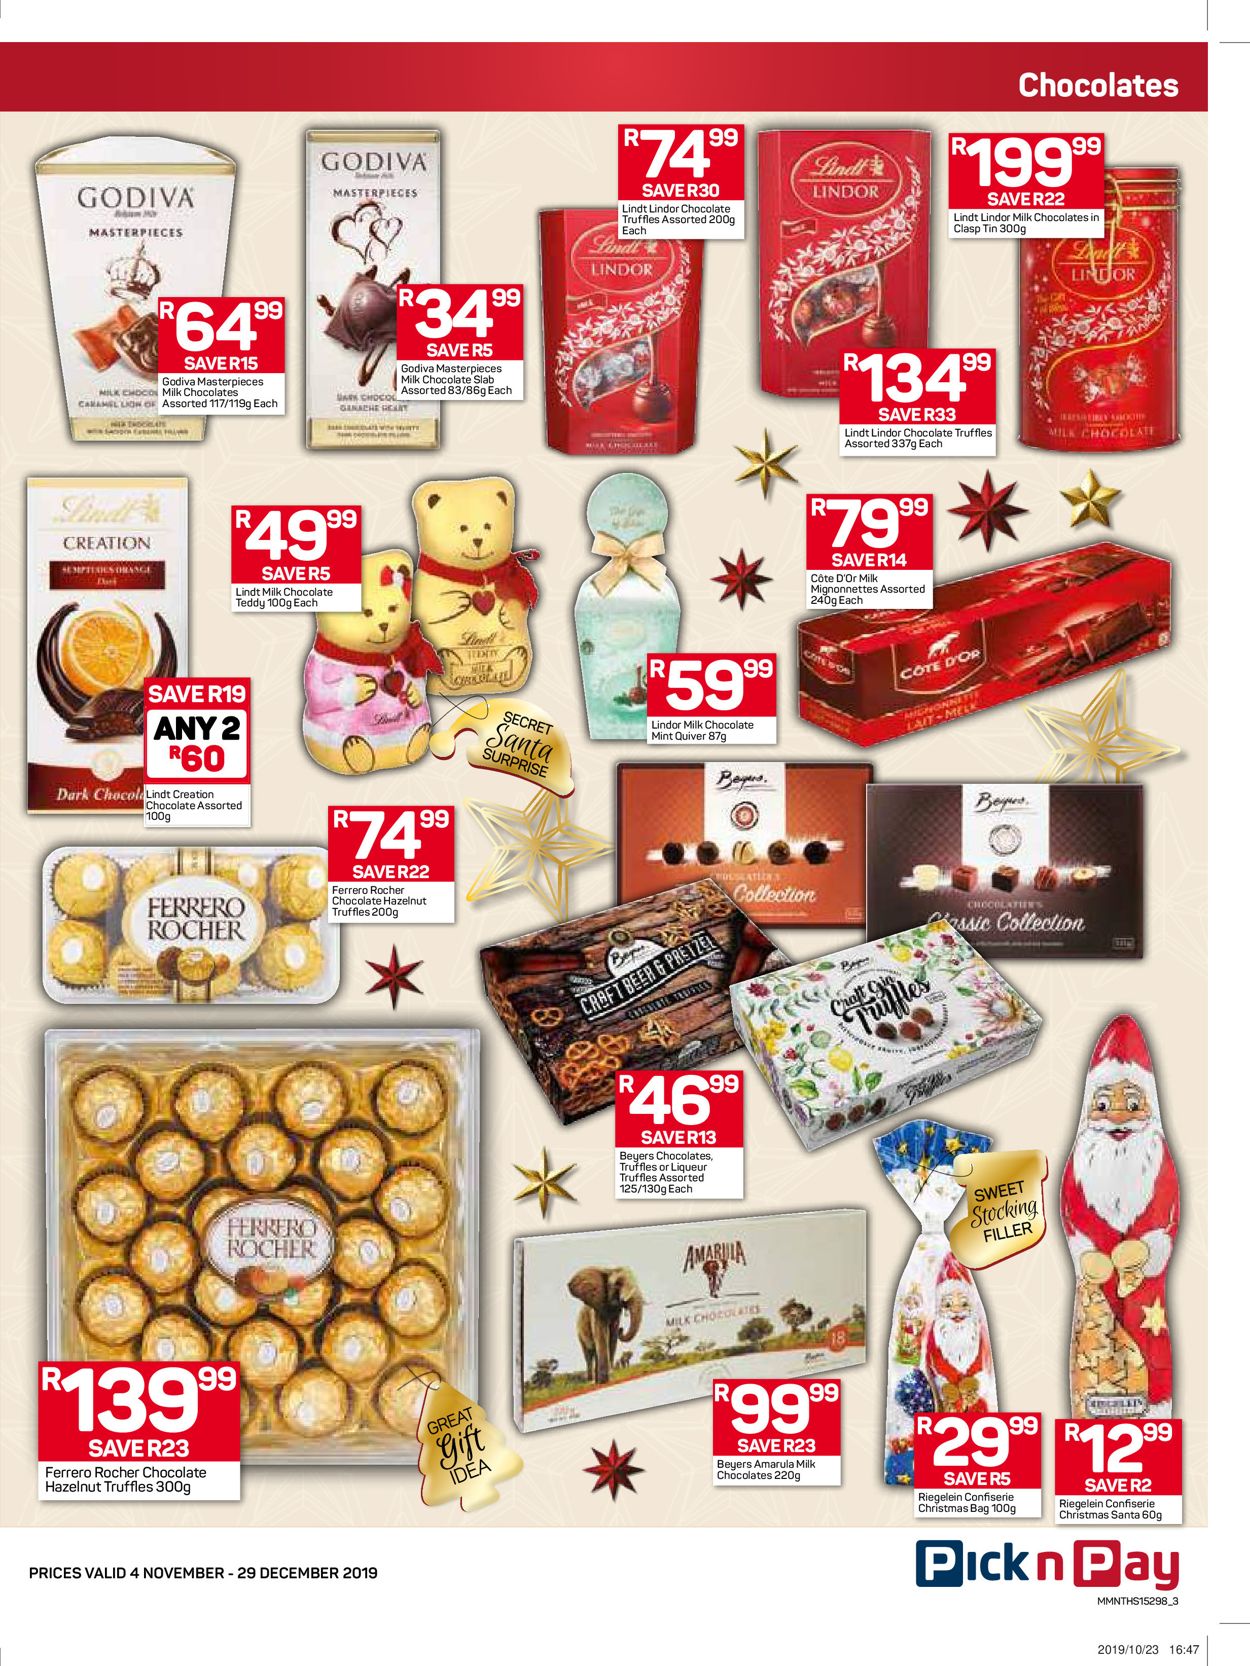 Pick n Pay Catalogue - 2019/11/04-2019/12/29 (Page 4)